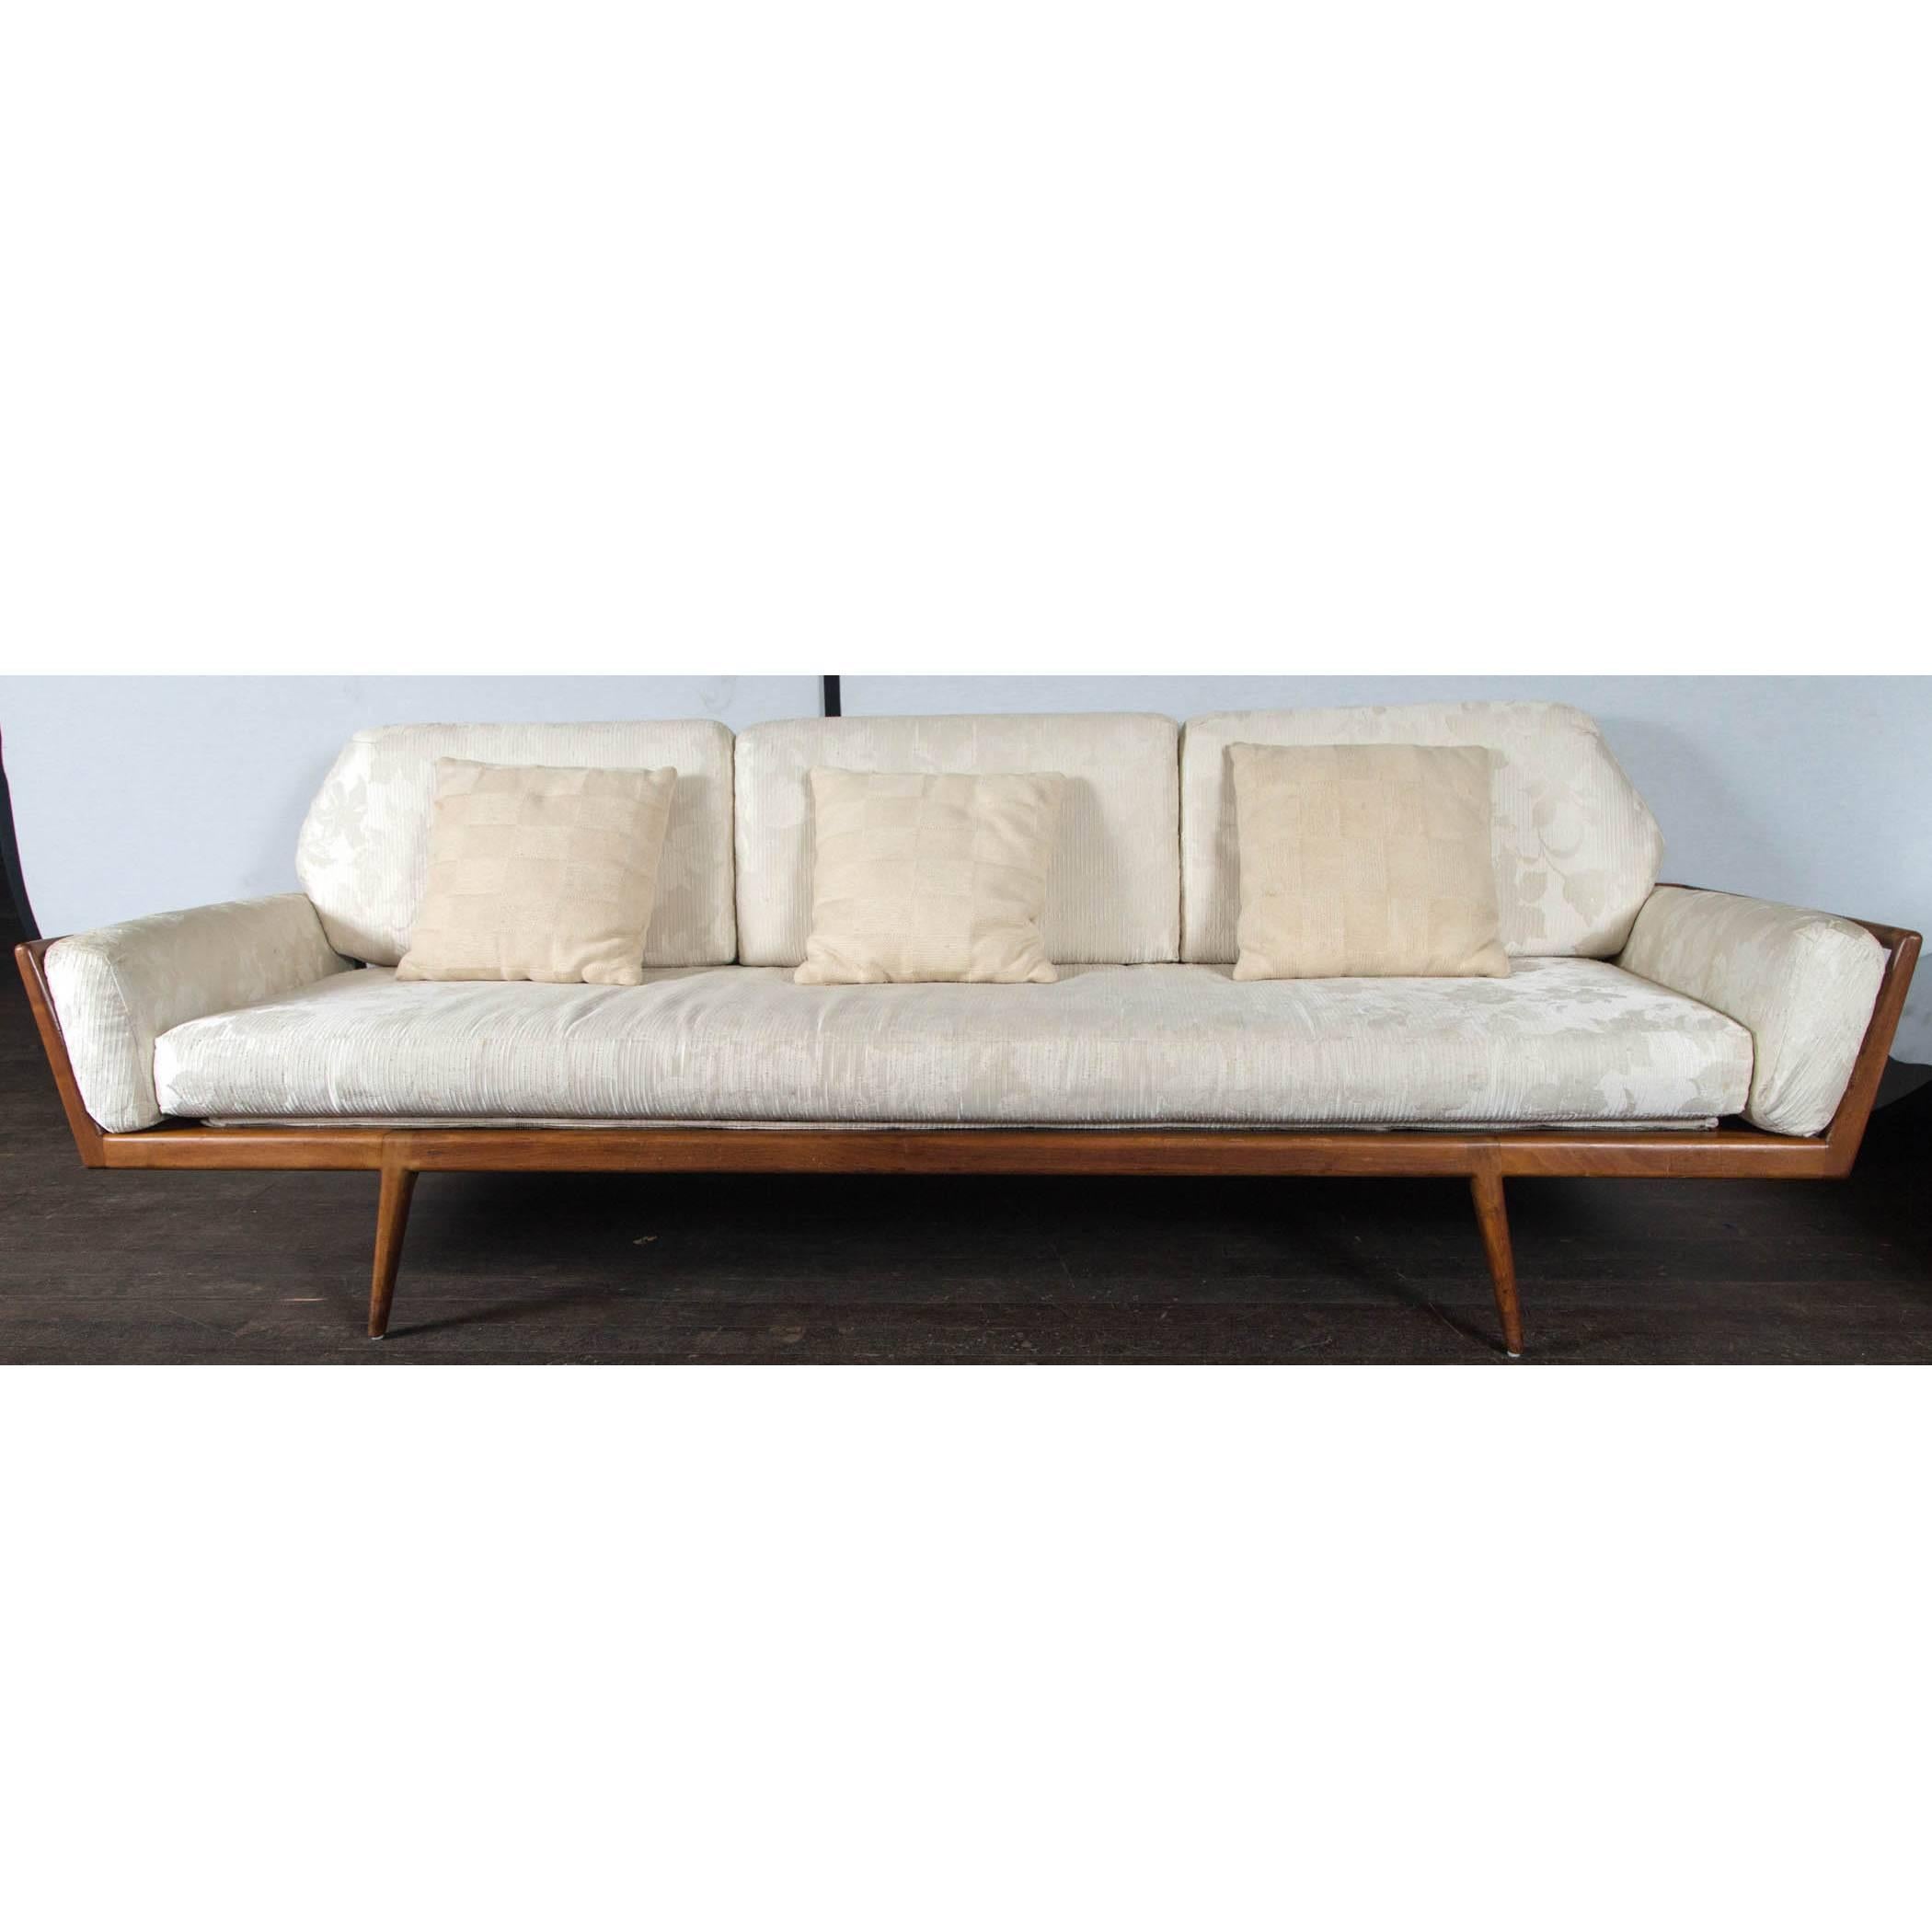 Stunning Gondola sofa by Mel Smilow. Excellent condition with original springs and cushions. Measures: Seat height 17 inches.